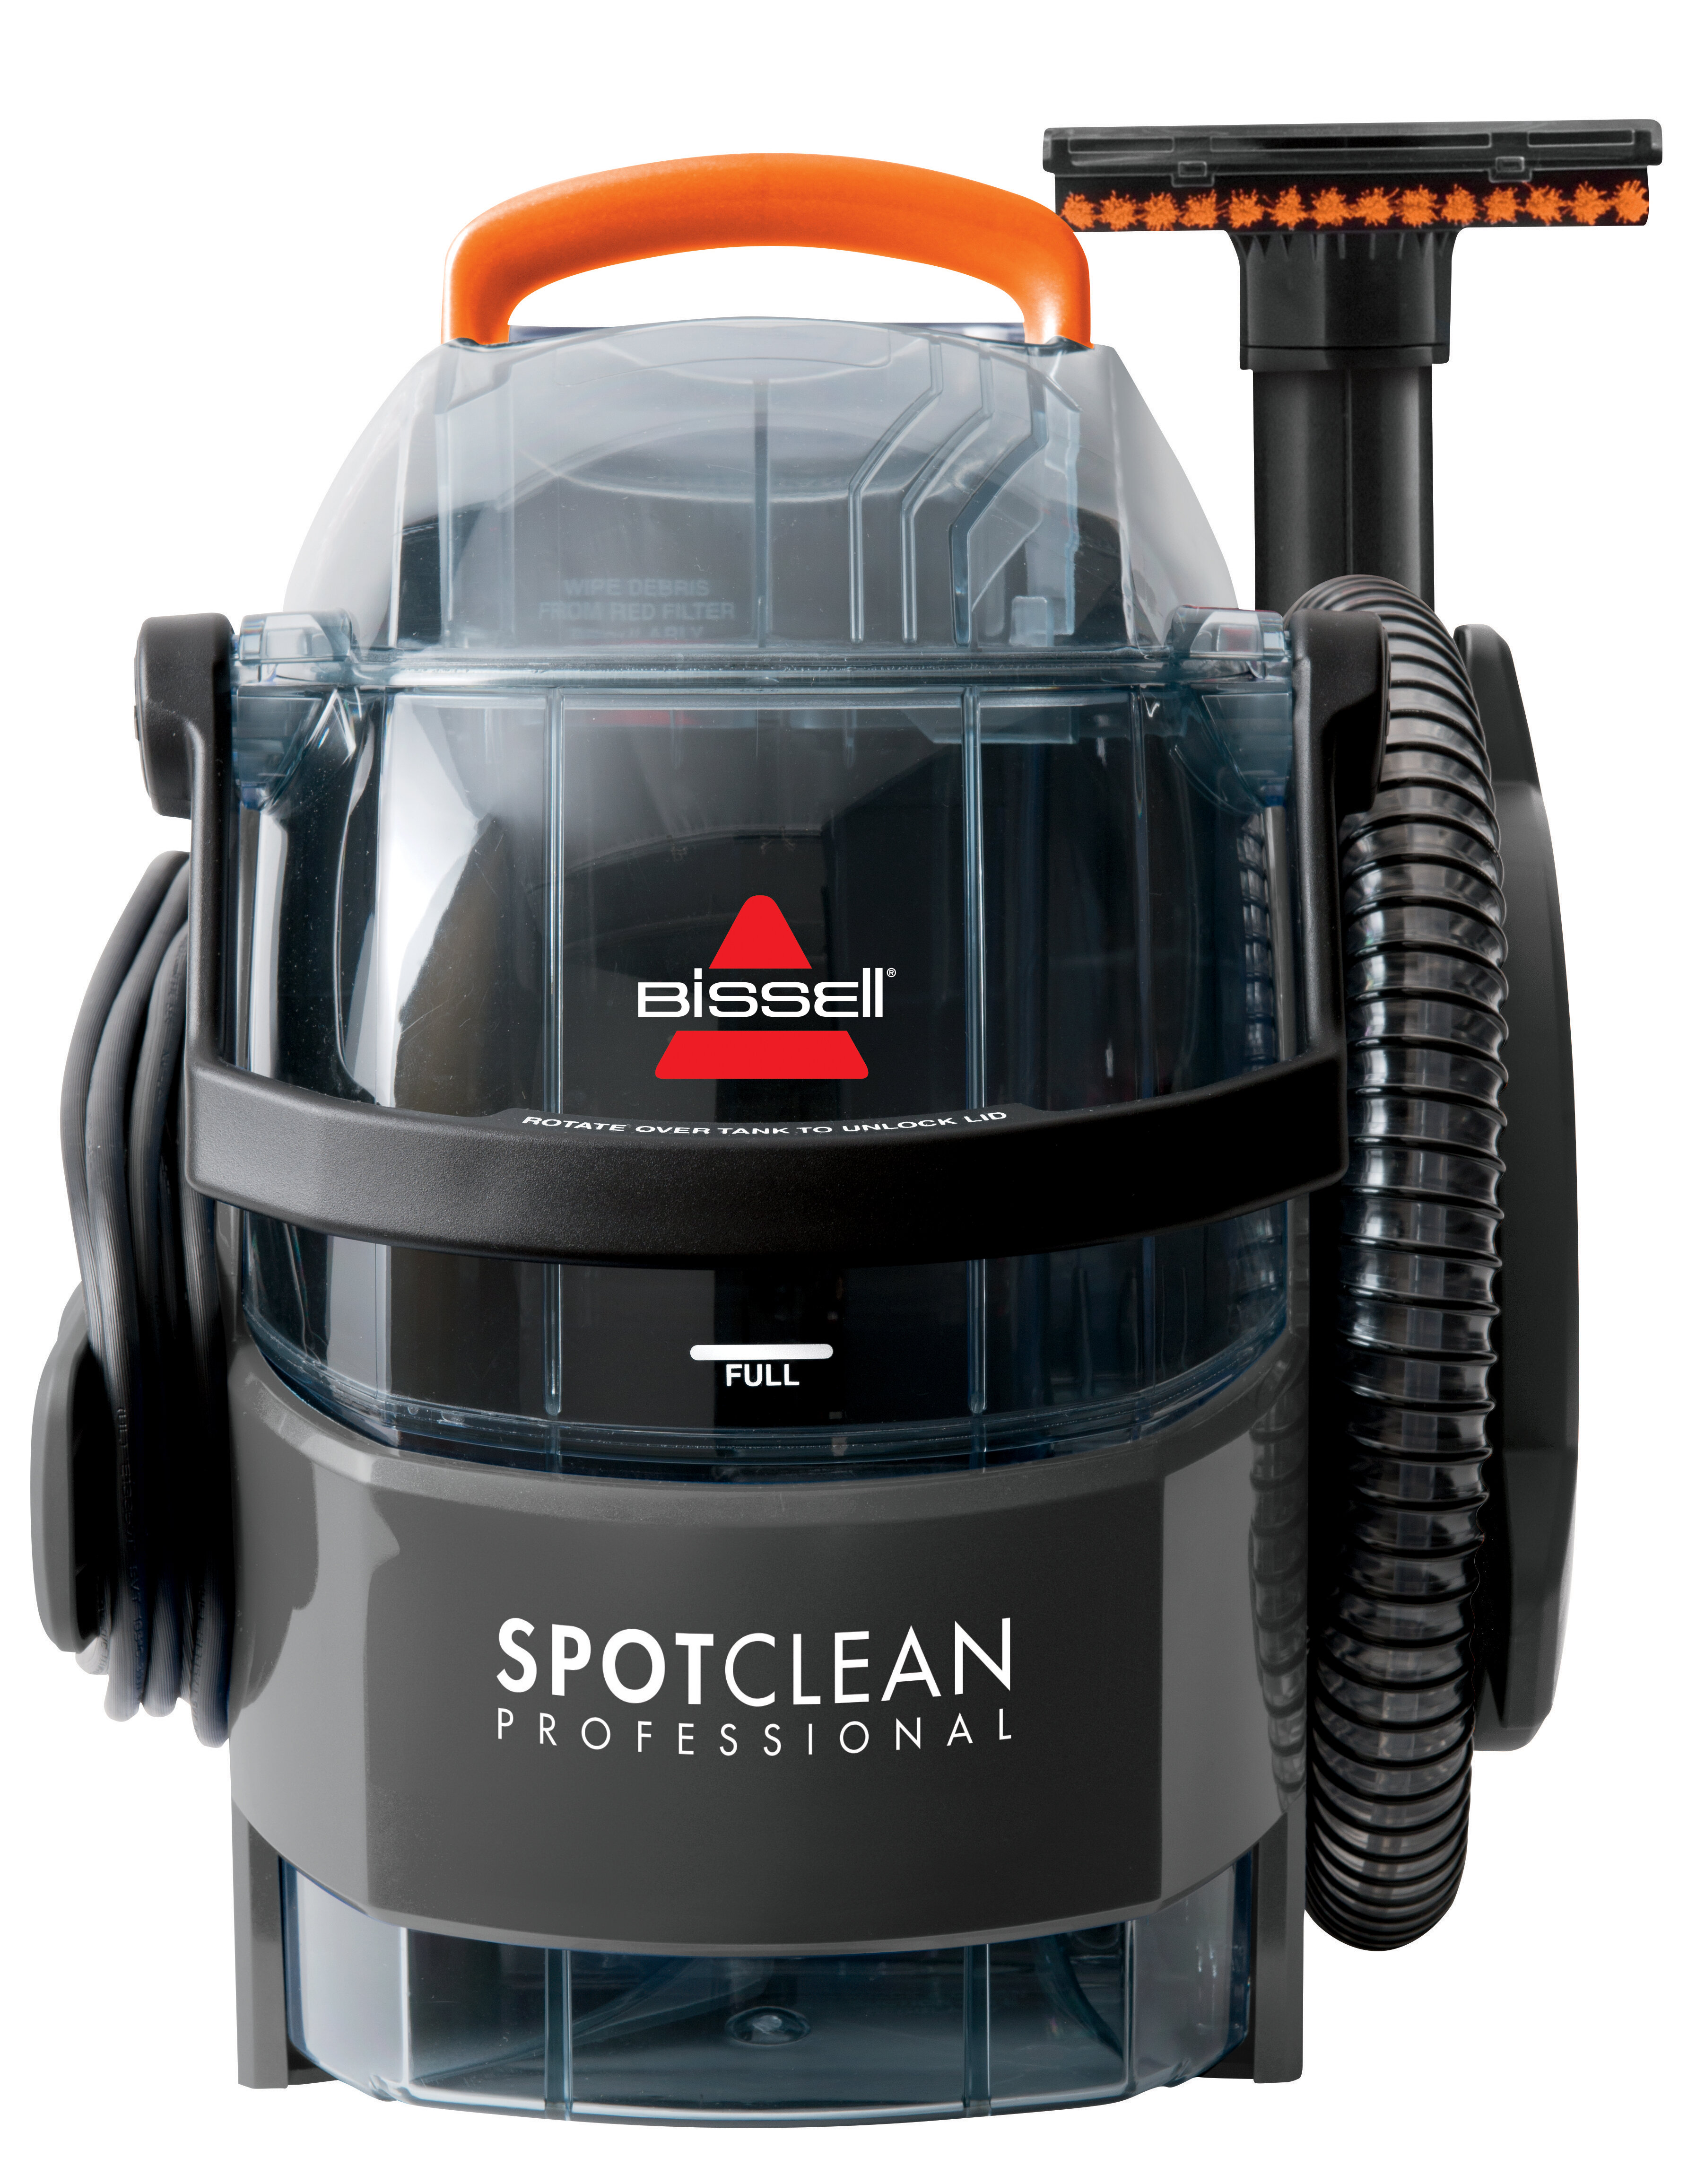 Bissell SpotClean Professional Canister Vacuum & Reviews - Wayfair Canada